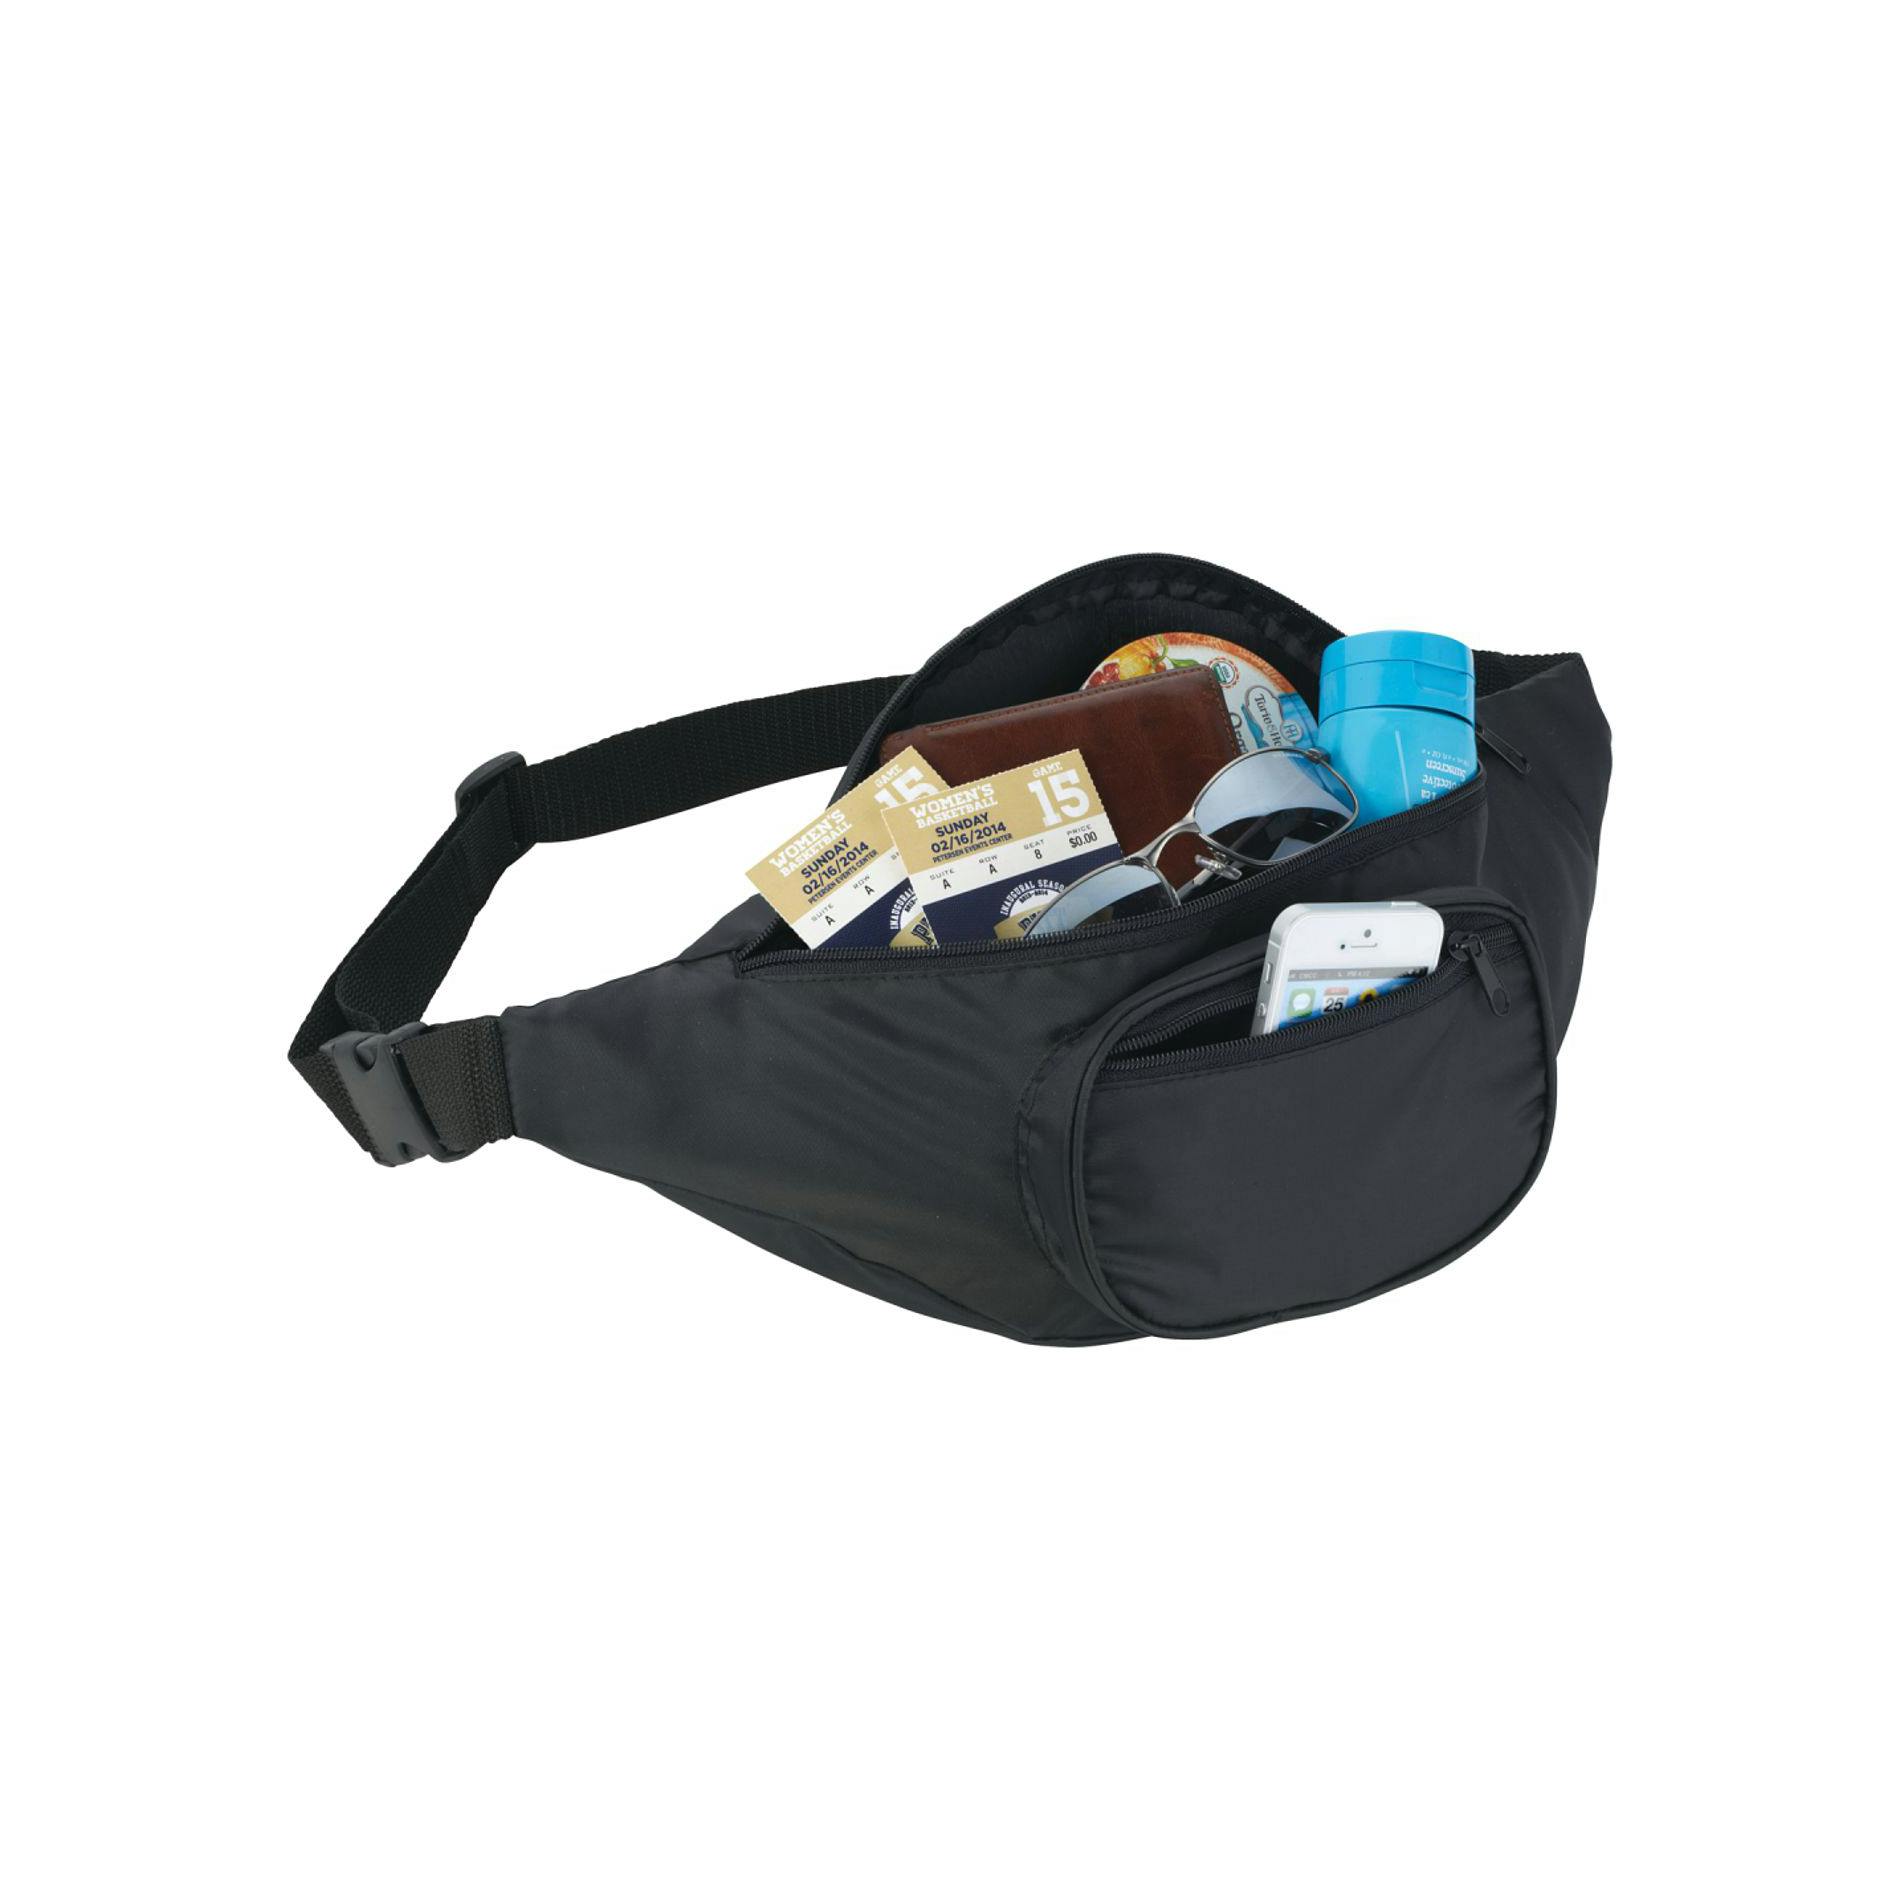 Hipster Deluxe Fanny Pack - additional Image 3